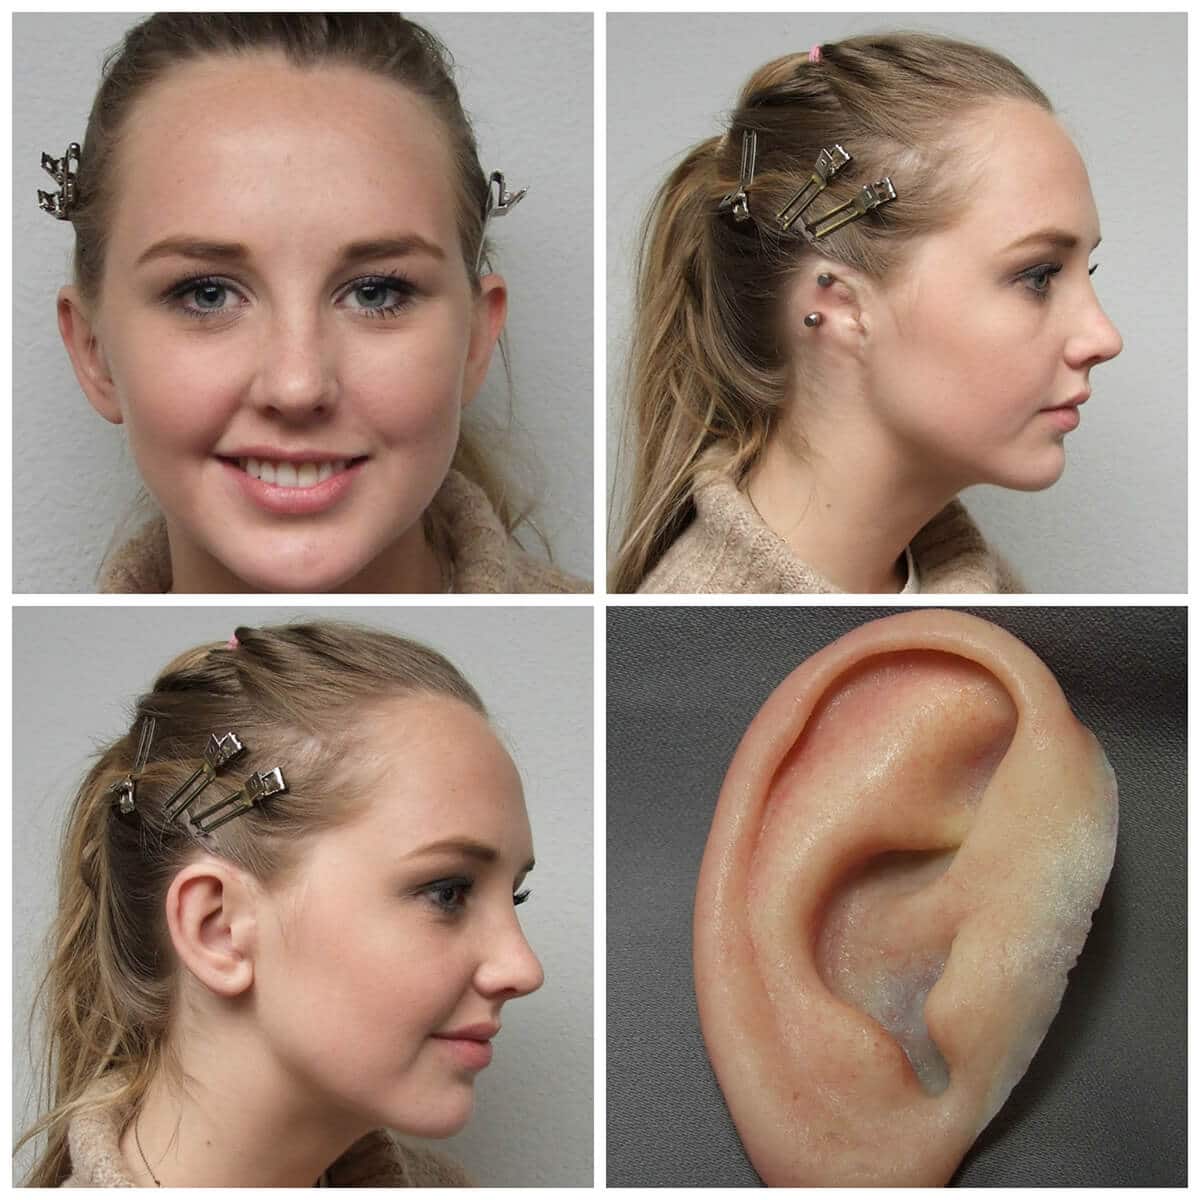 Images of young woman withot her ear prosthesis showing her abutments, one showing her prosthesis, and a photo of her smiling with the ear atteached fromfront and the side view.